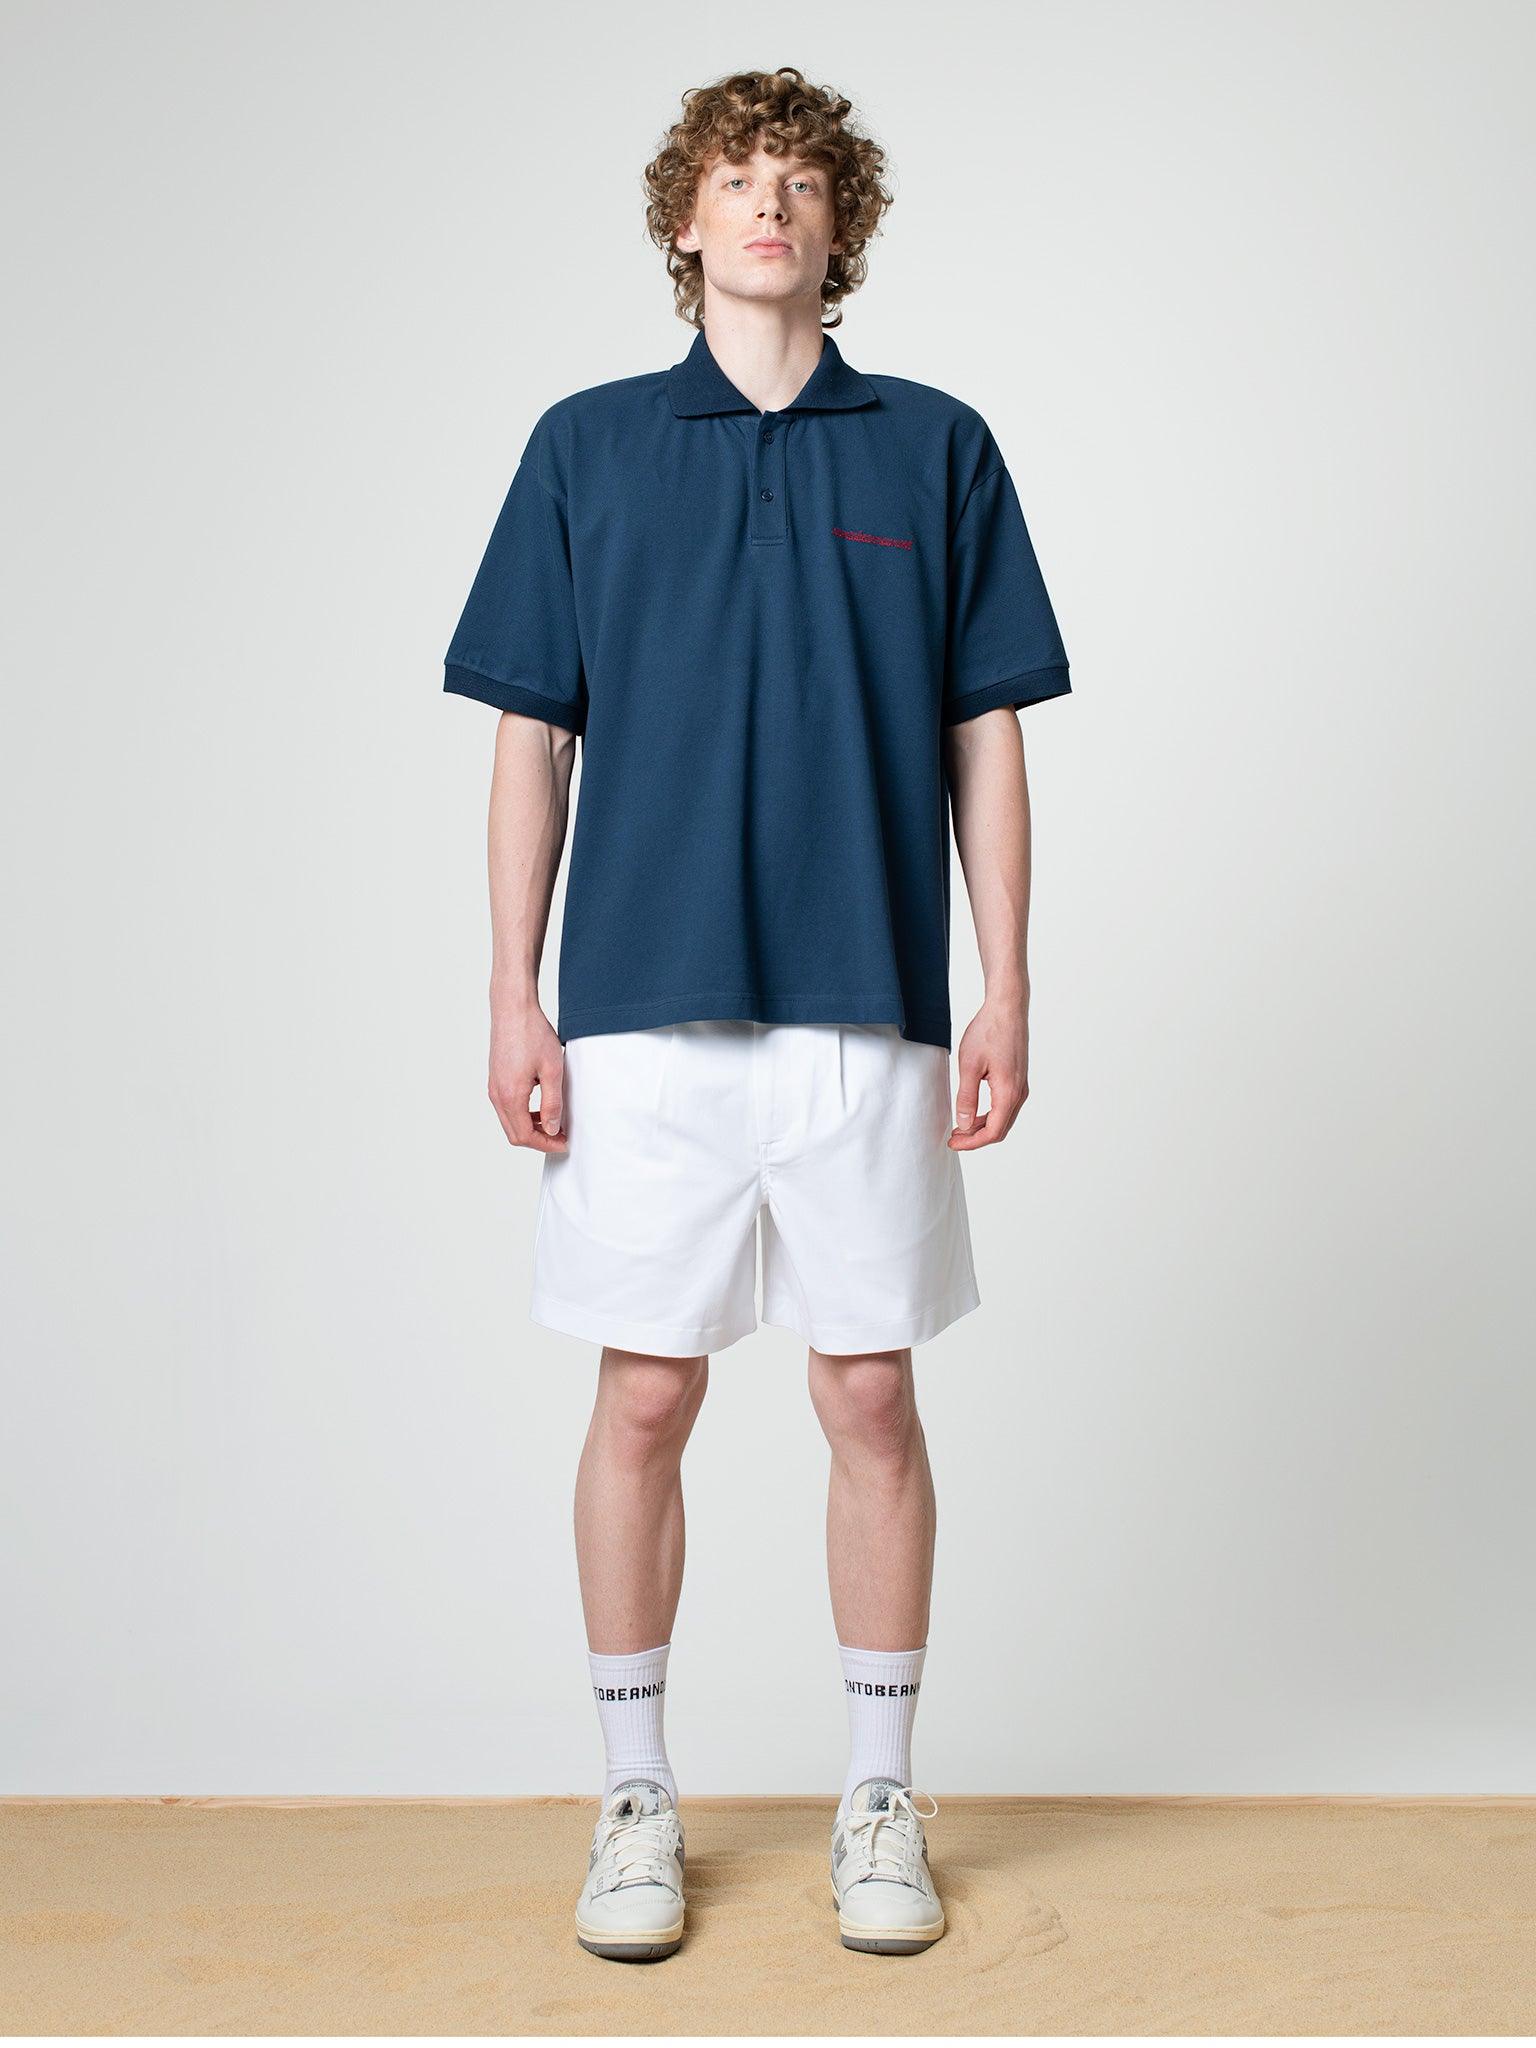 Riviera Polo T-Shirt - SOON TO BE ANNOUNCED